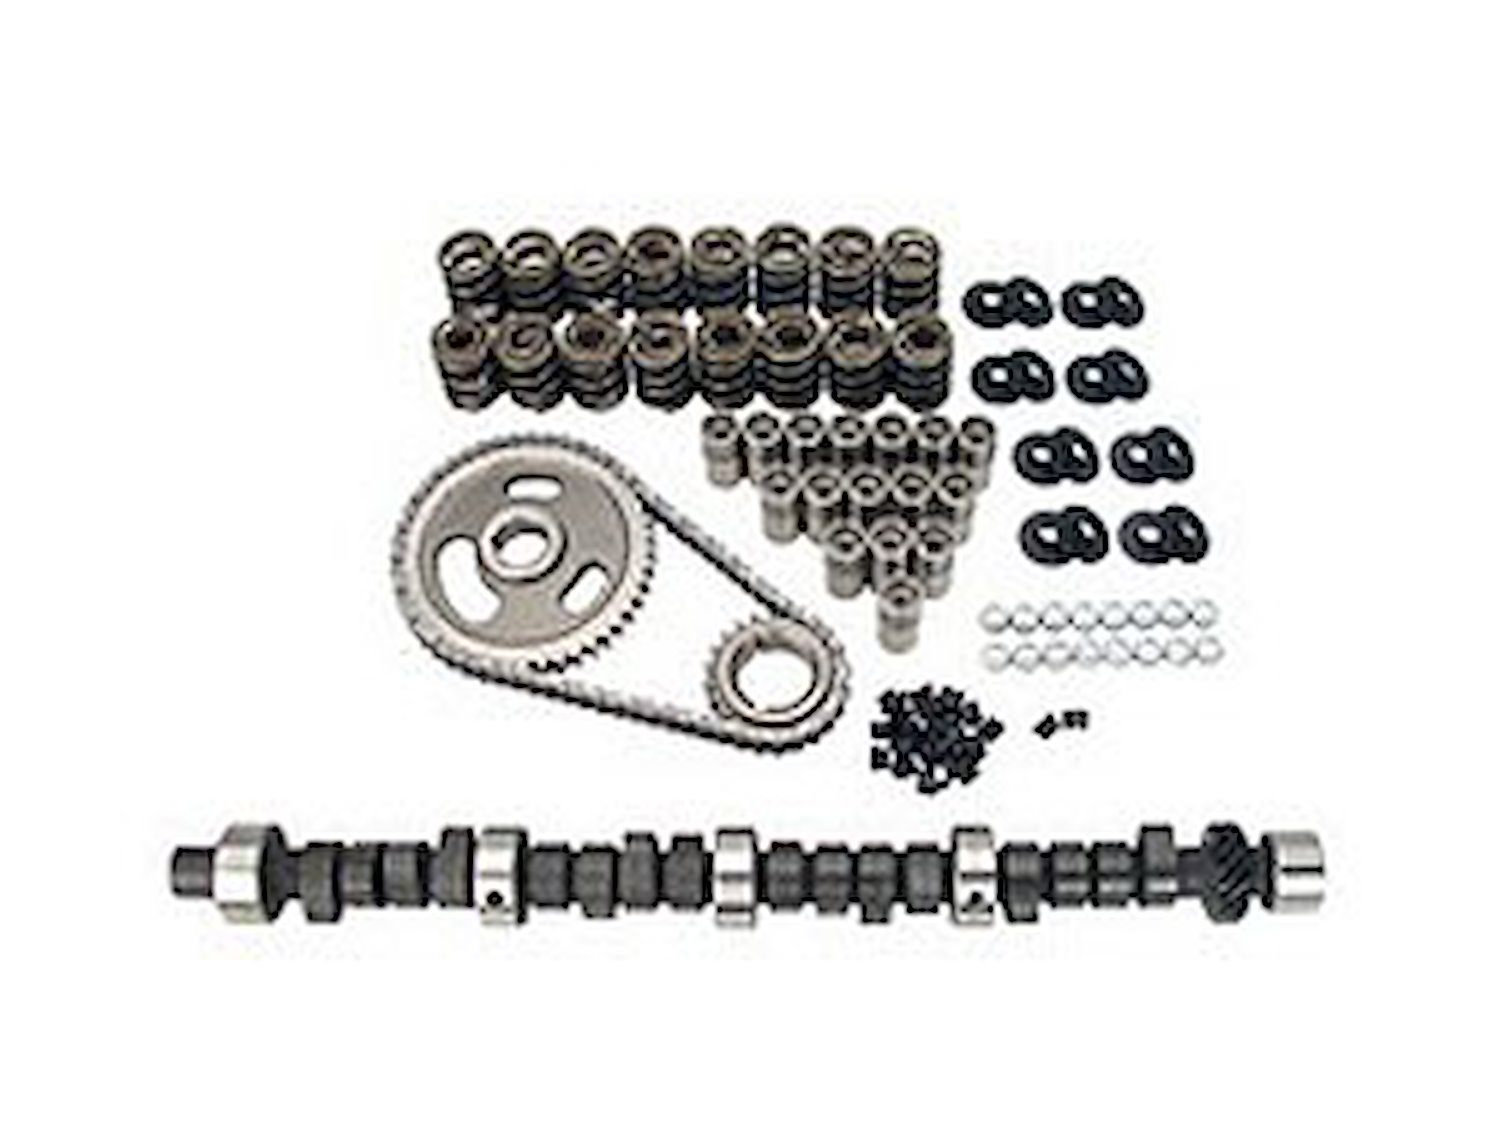 Xtreme Energy 262H Hydraulic Flat Tappet Camshaft Complete Kit Lift: .493"/.500" Duration: 262°/270° RPM Range: 1800-5800